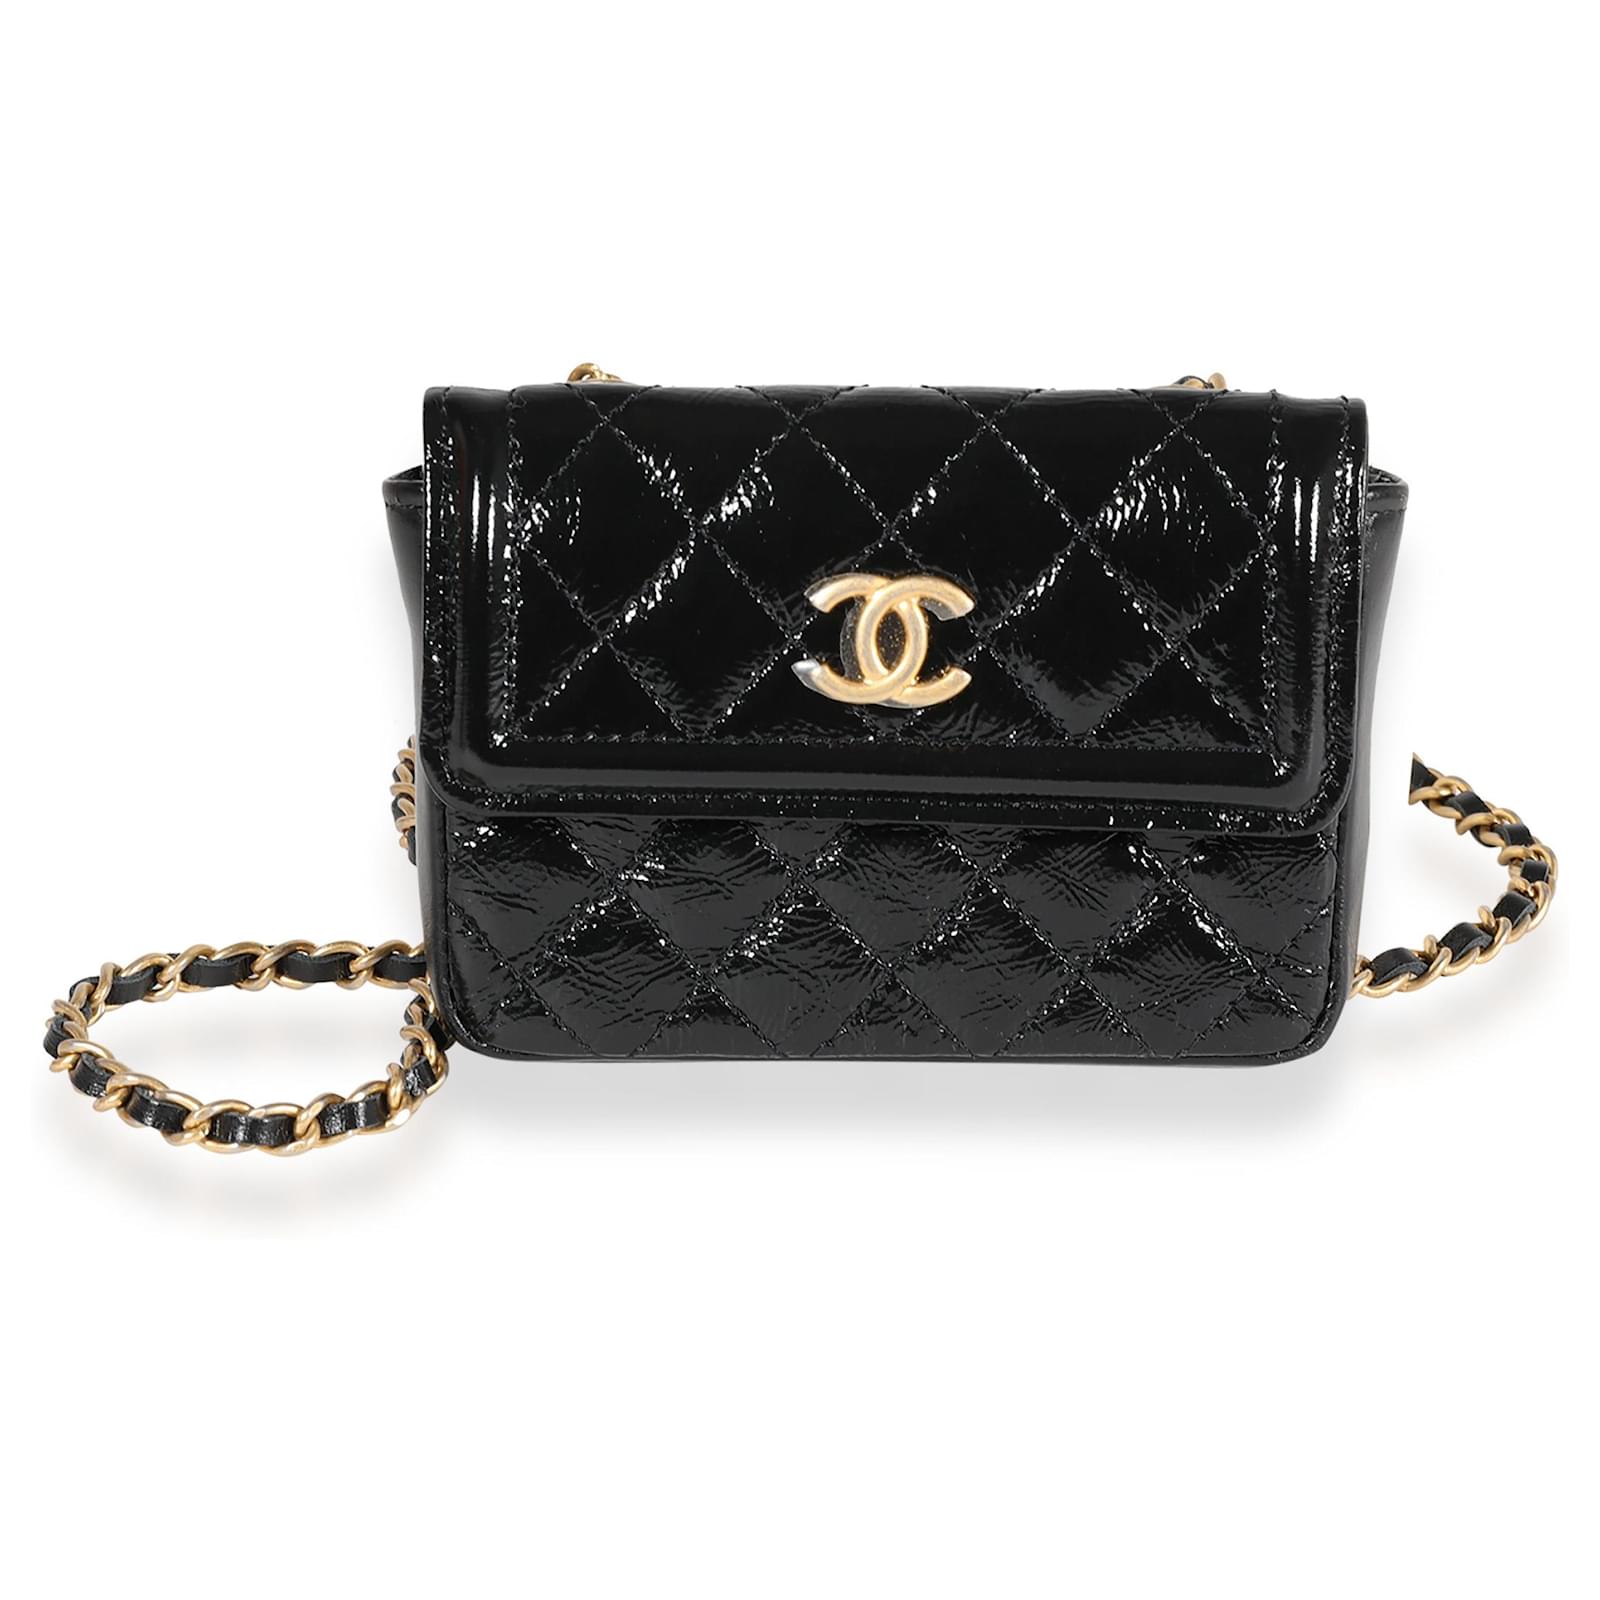 Chanel Black Quilted Patent Leather Mini Belt Bag Pony-style